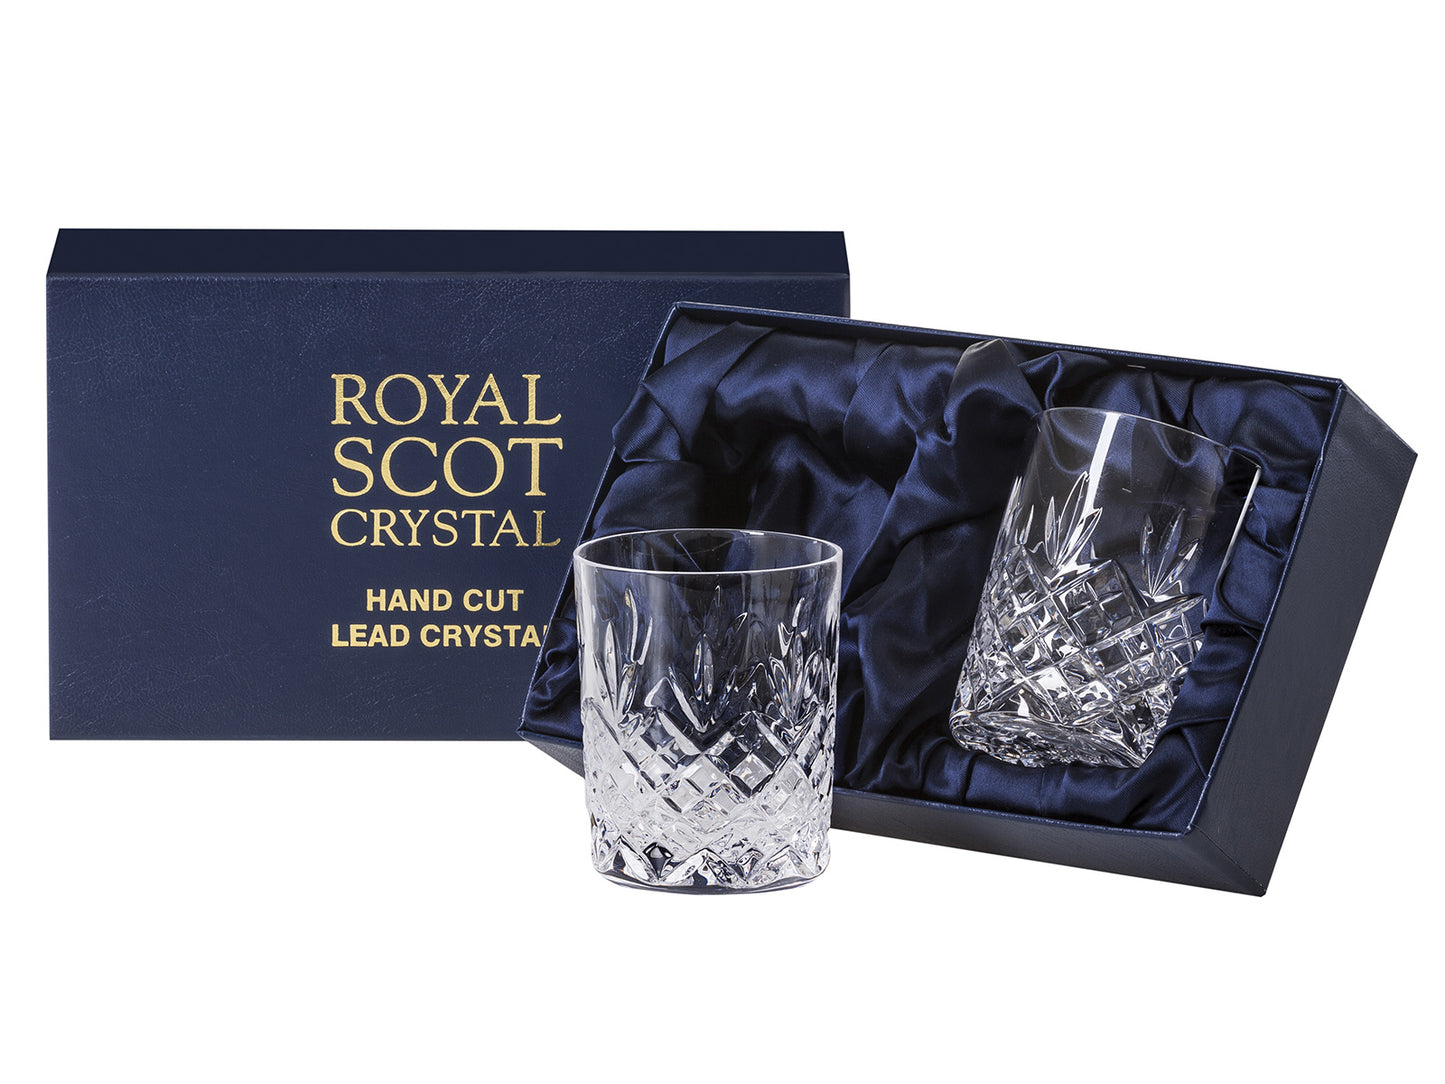 Royal Scot Crystal Edinburgh Whisky Tumblers - Pair are hand-cut in Britain with the triple-flicked Edinburgh design. Smaller and lighter in weight, these glasses adopt the straight cylindrical shape of the larger tumblers, just without a weighted crystal base.